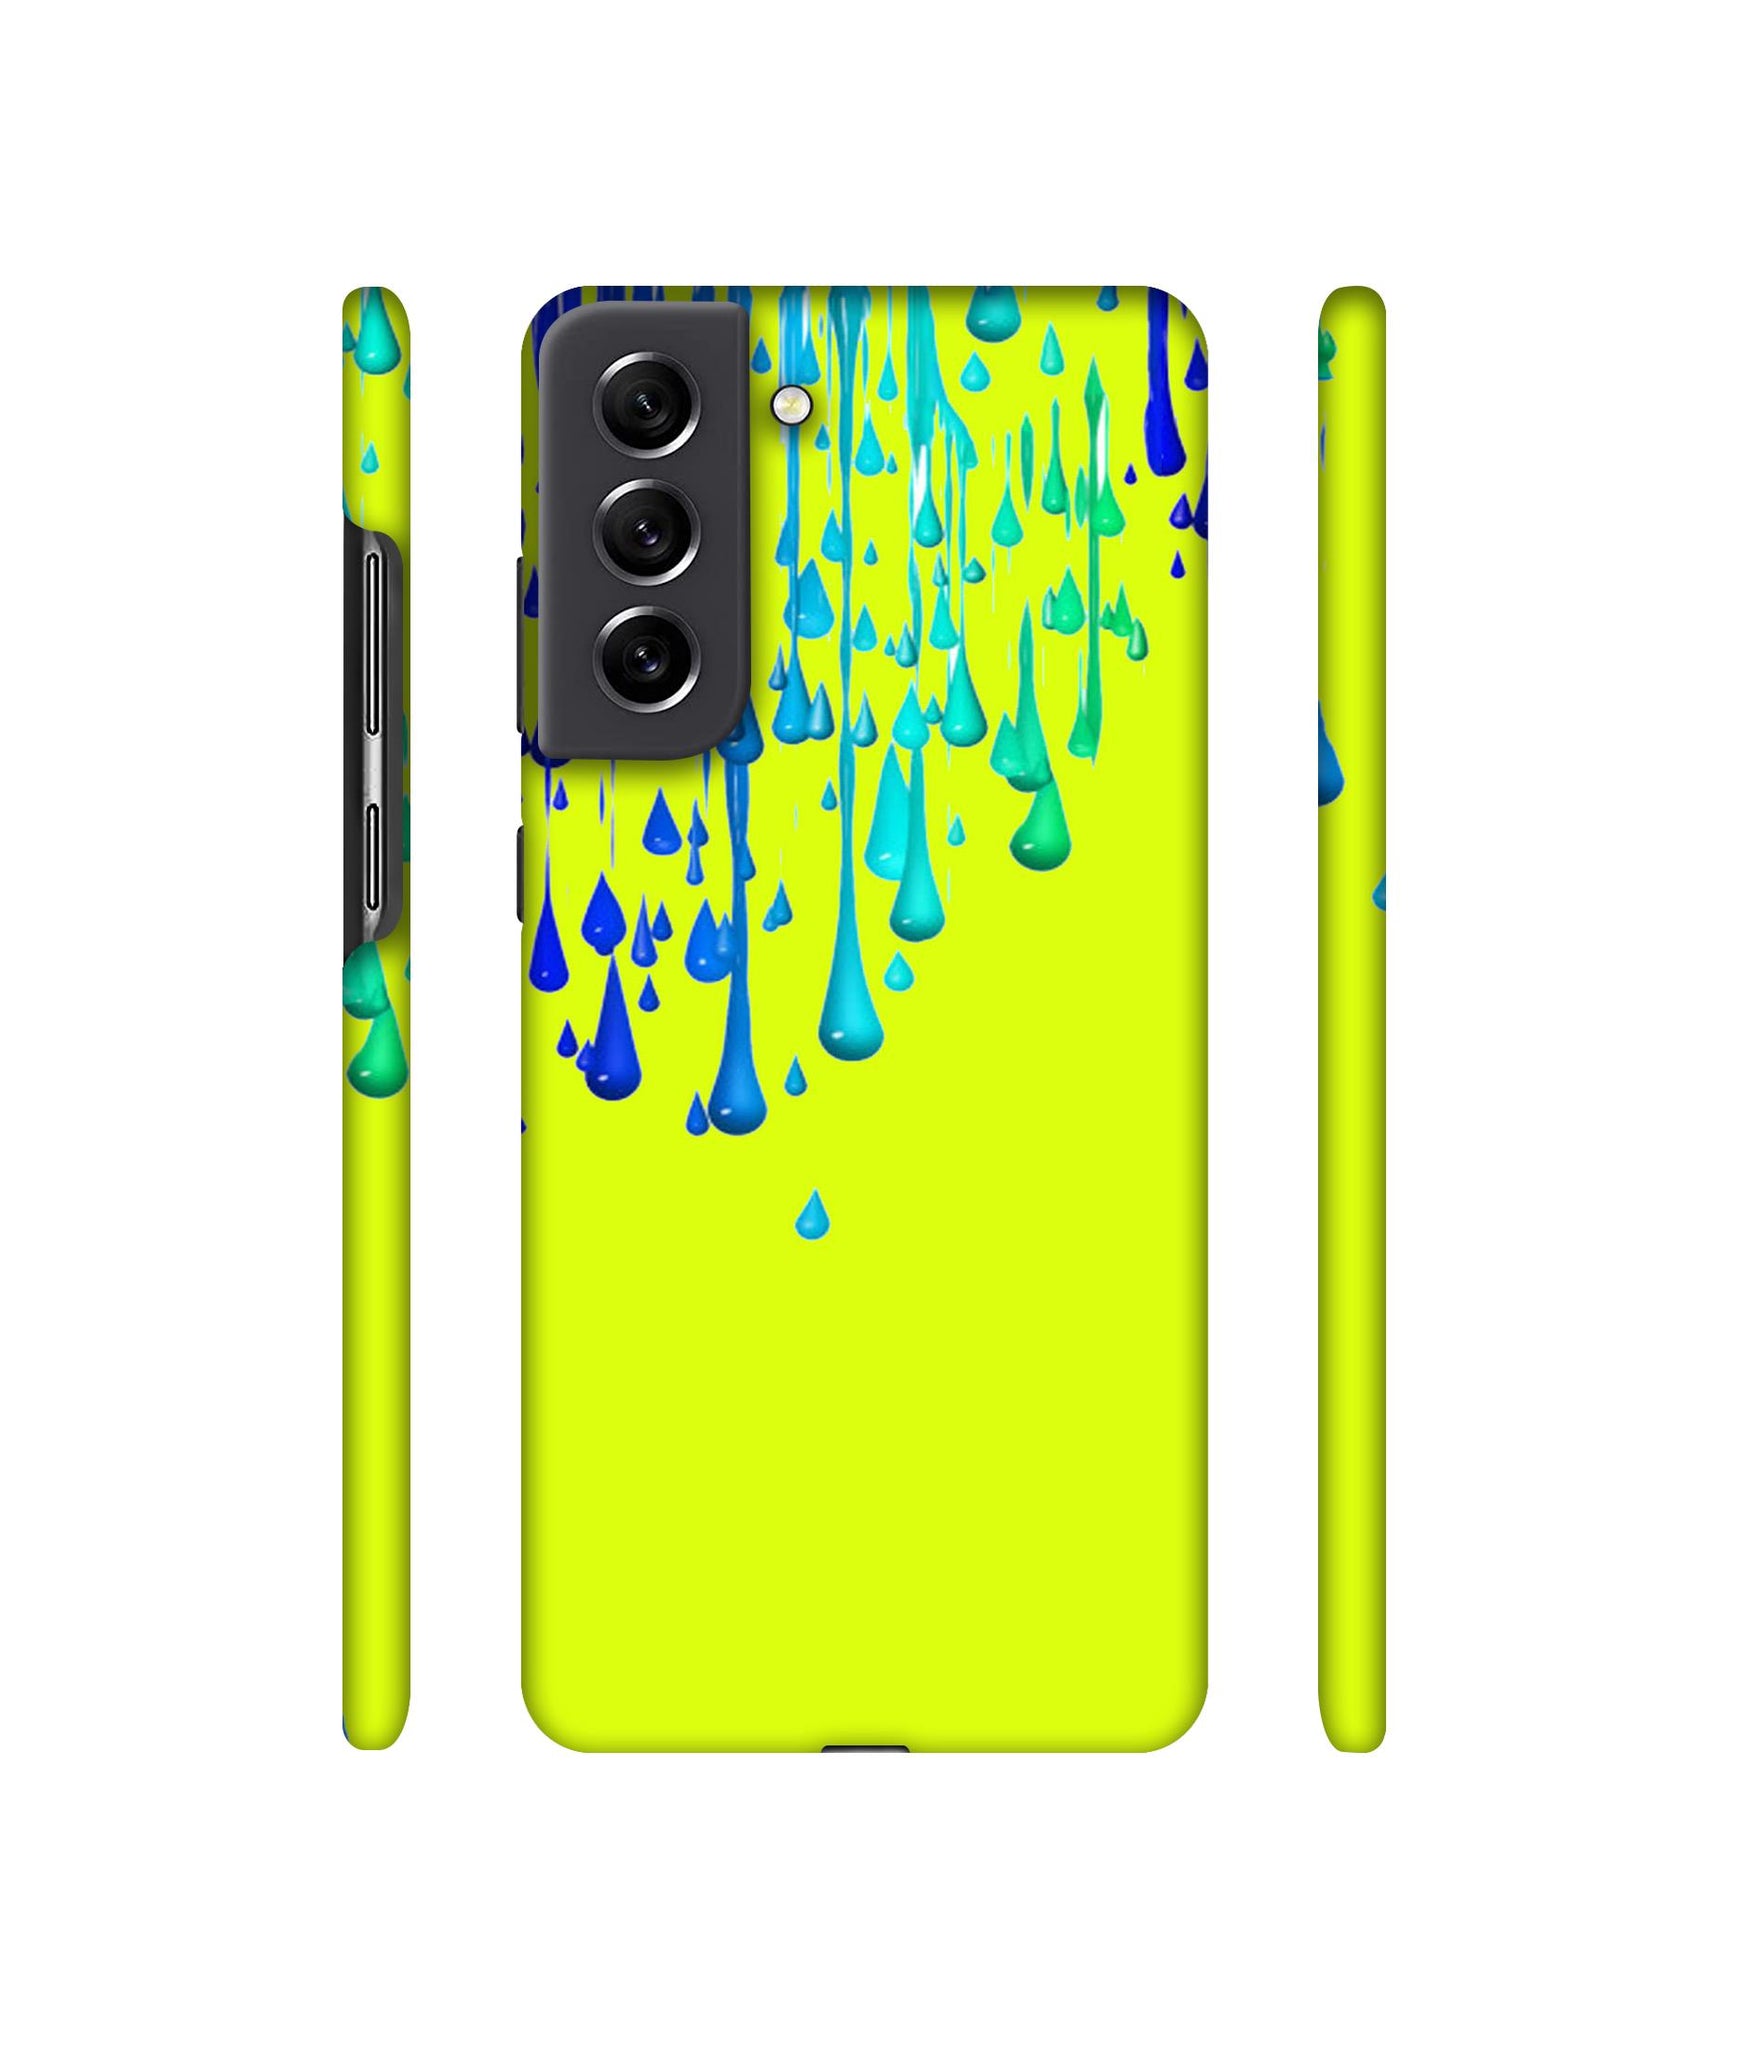 Neon Paint Designer Hard Back Cover for Samsung Galaxy S21 FE 5G